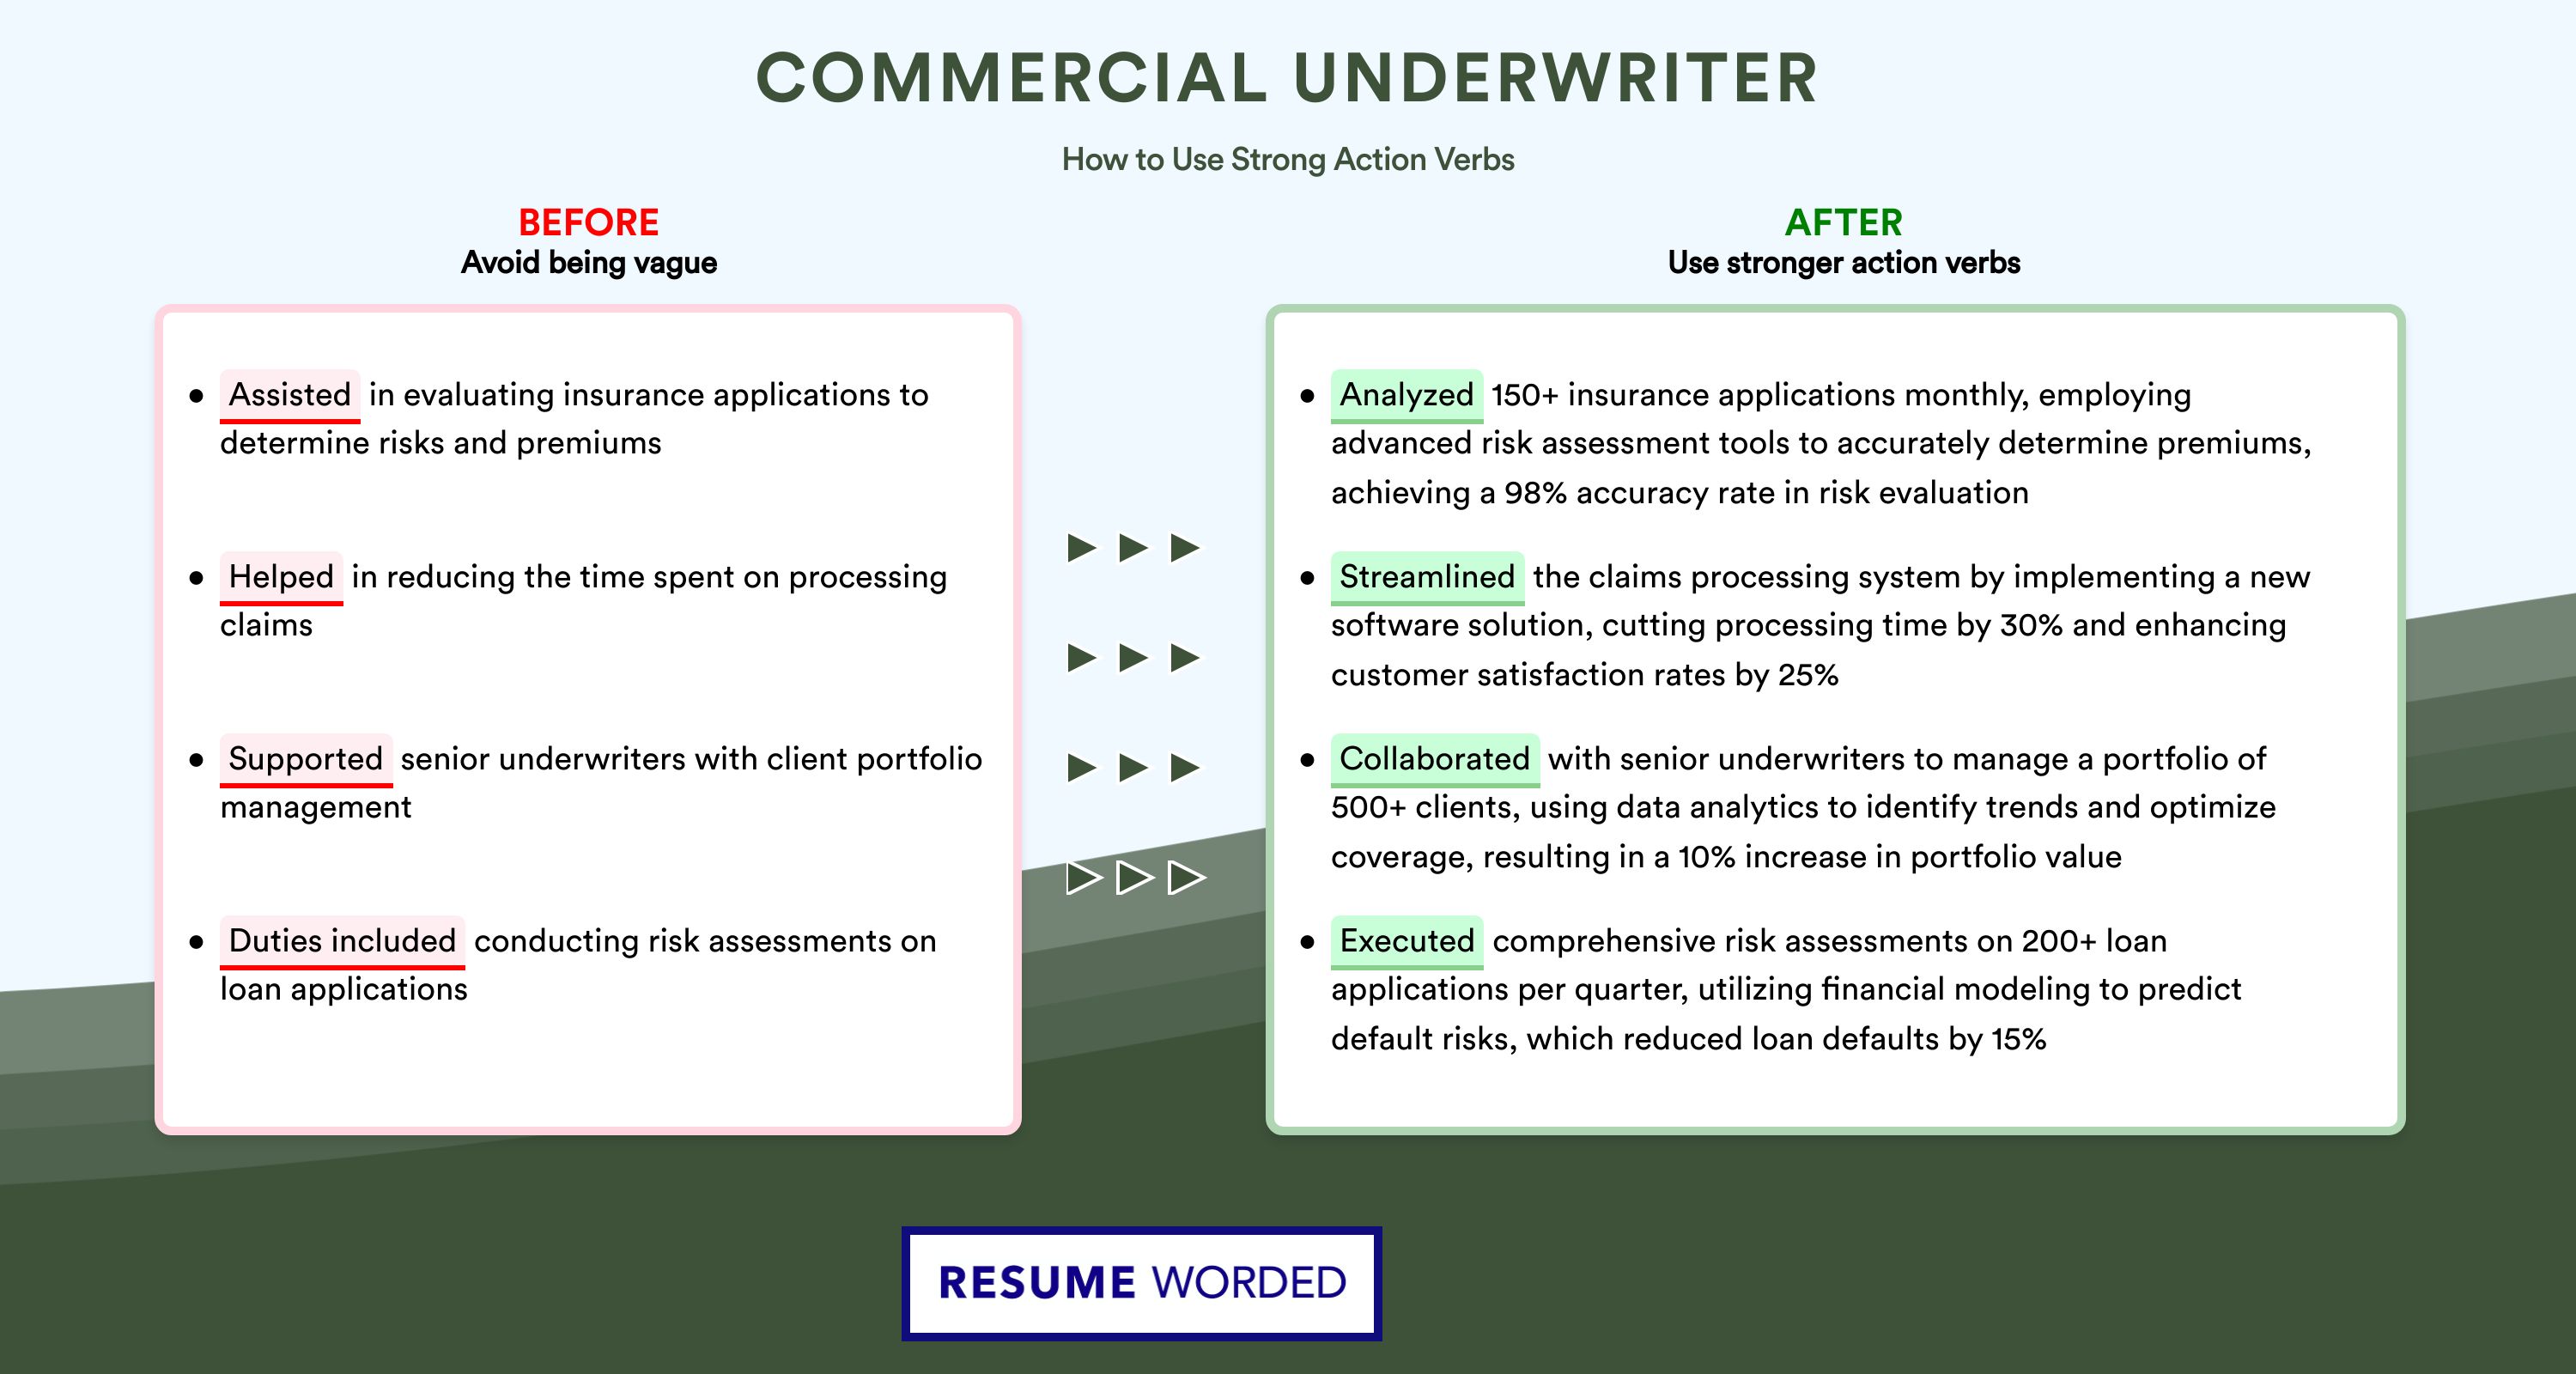 Action Verbs for Commercial Underwriter